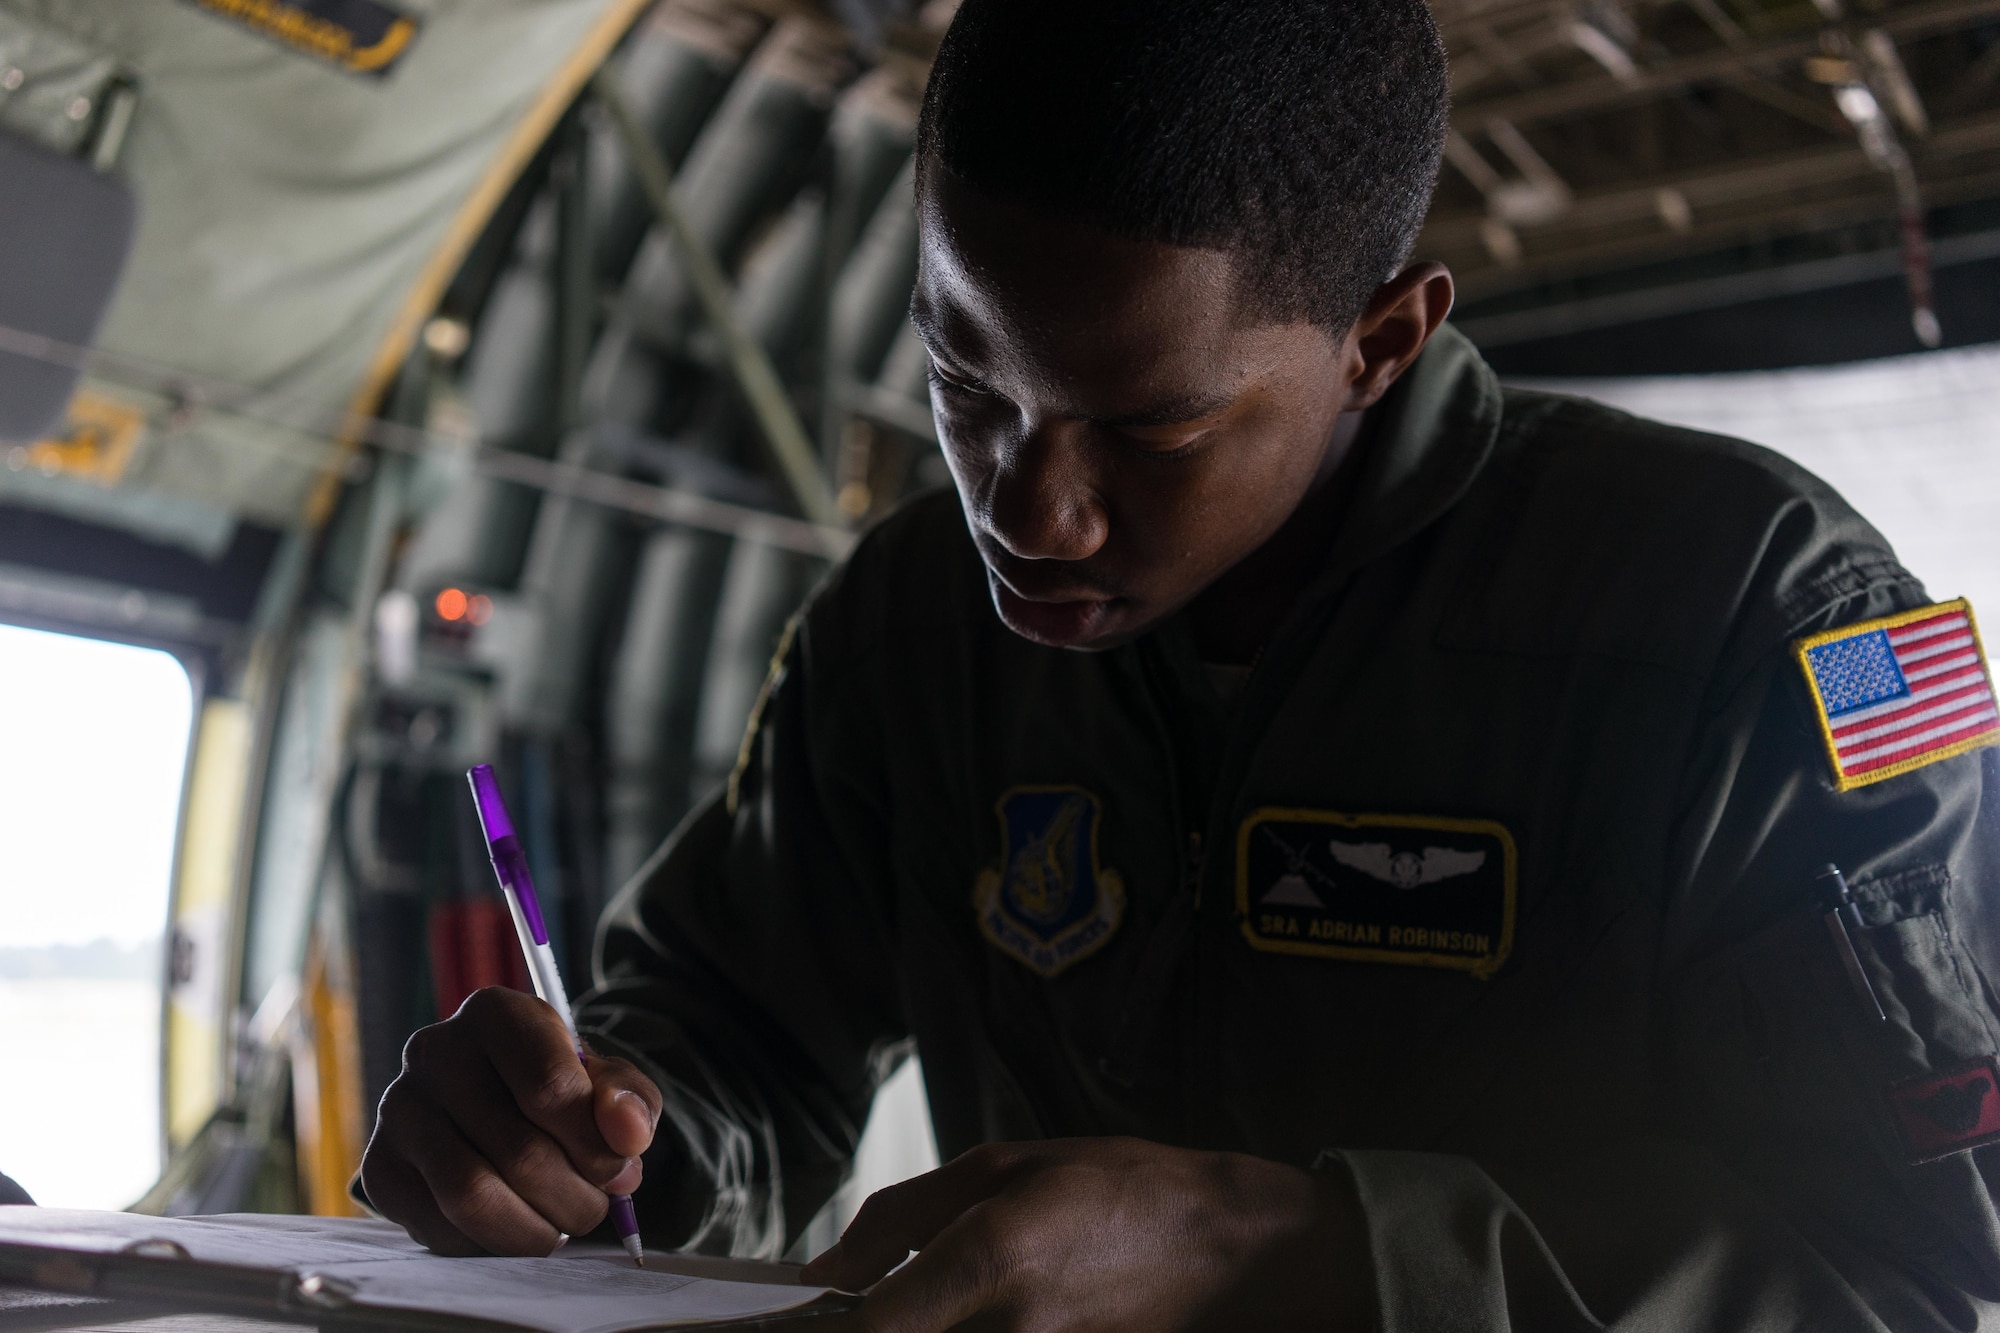 U.S. Air Force Senior Airman Adrian Robinson, 36th Airlift Squadron joint airdrop inspector, signs off on a completed inspection of a container delivery system bundle during Red Flag Alaska on Joint Base Elmendorf-Richardson, Alaska, Aug. 12, 2016. JAI's must perform two inspections; one before loading to ensure cargo is aircraft ready and rigged in accordance with proper rigging procedures and an after inspection of the cargo once it's been completely loaded on the aircraft. (U.S. Air Force photo by Staff Sgt. Michael Smith/Released)